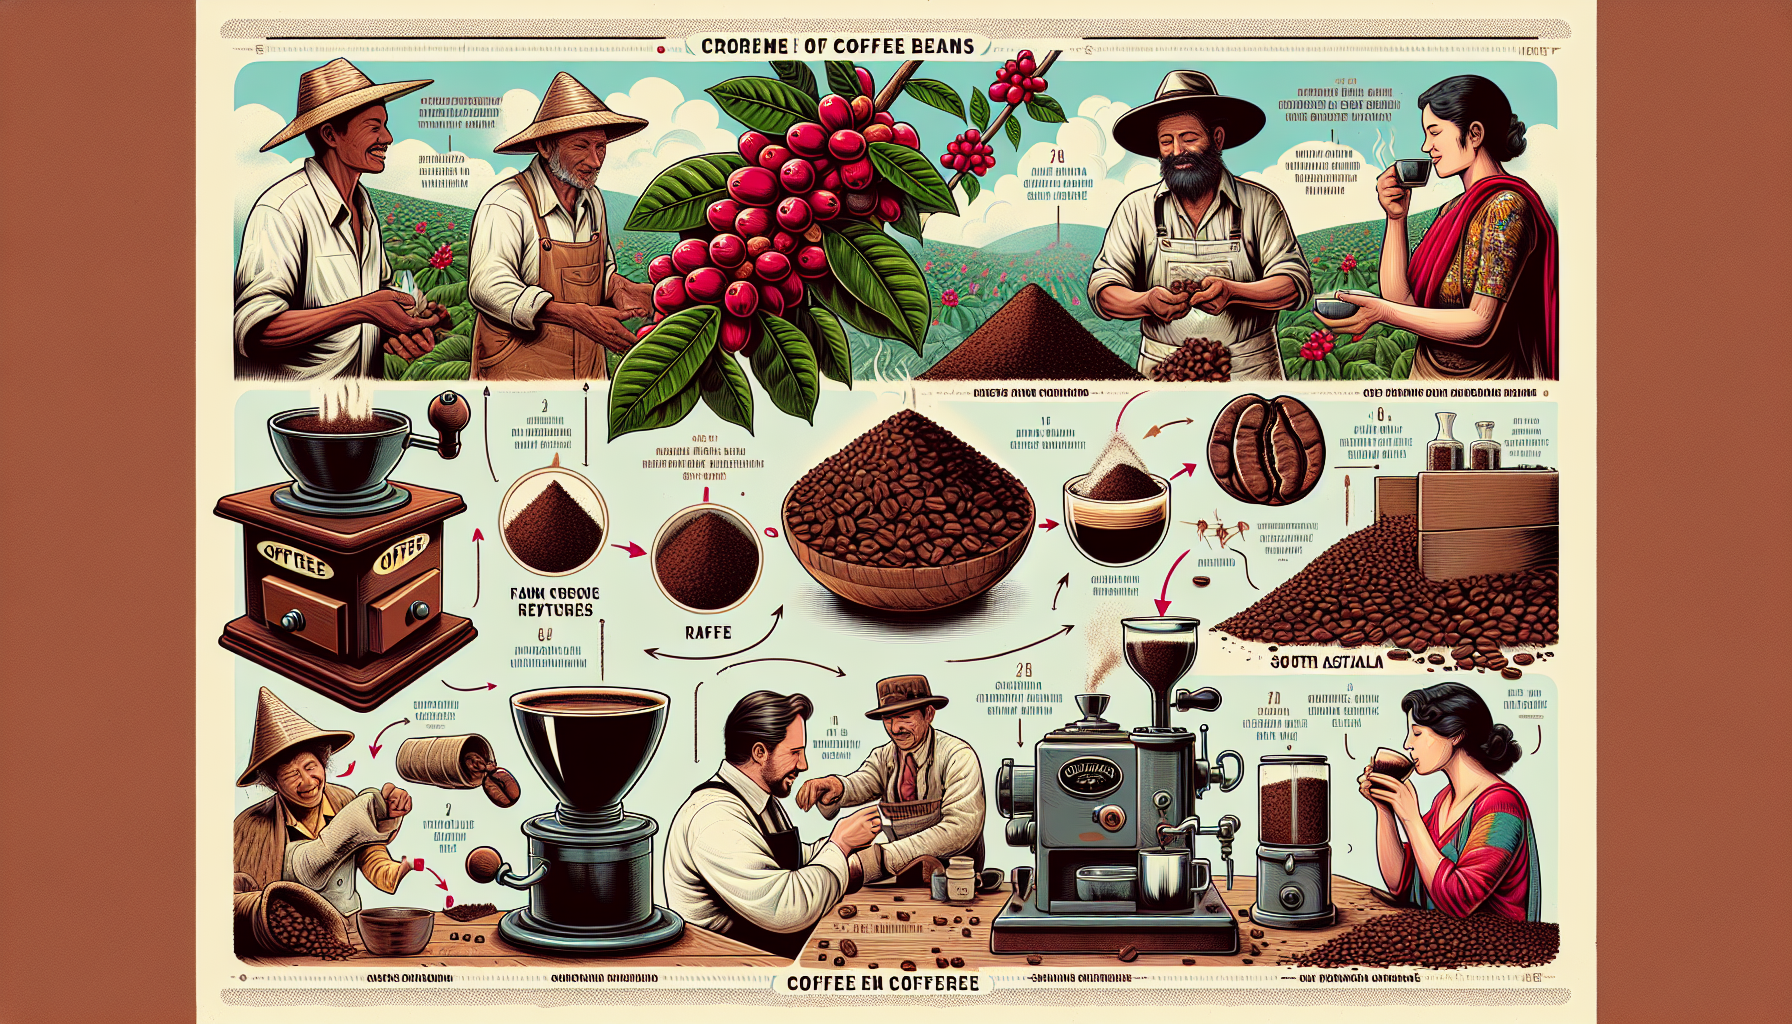 An in-depth illustration detailing the journey of coffee beans from farm to cup. It includes images of ripe coffee cherries, a plantation worker (Hispanic man) handpicking them, the process of drying 